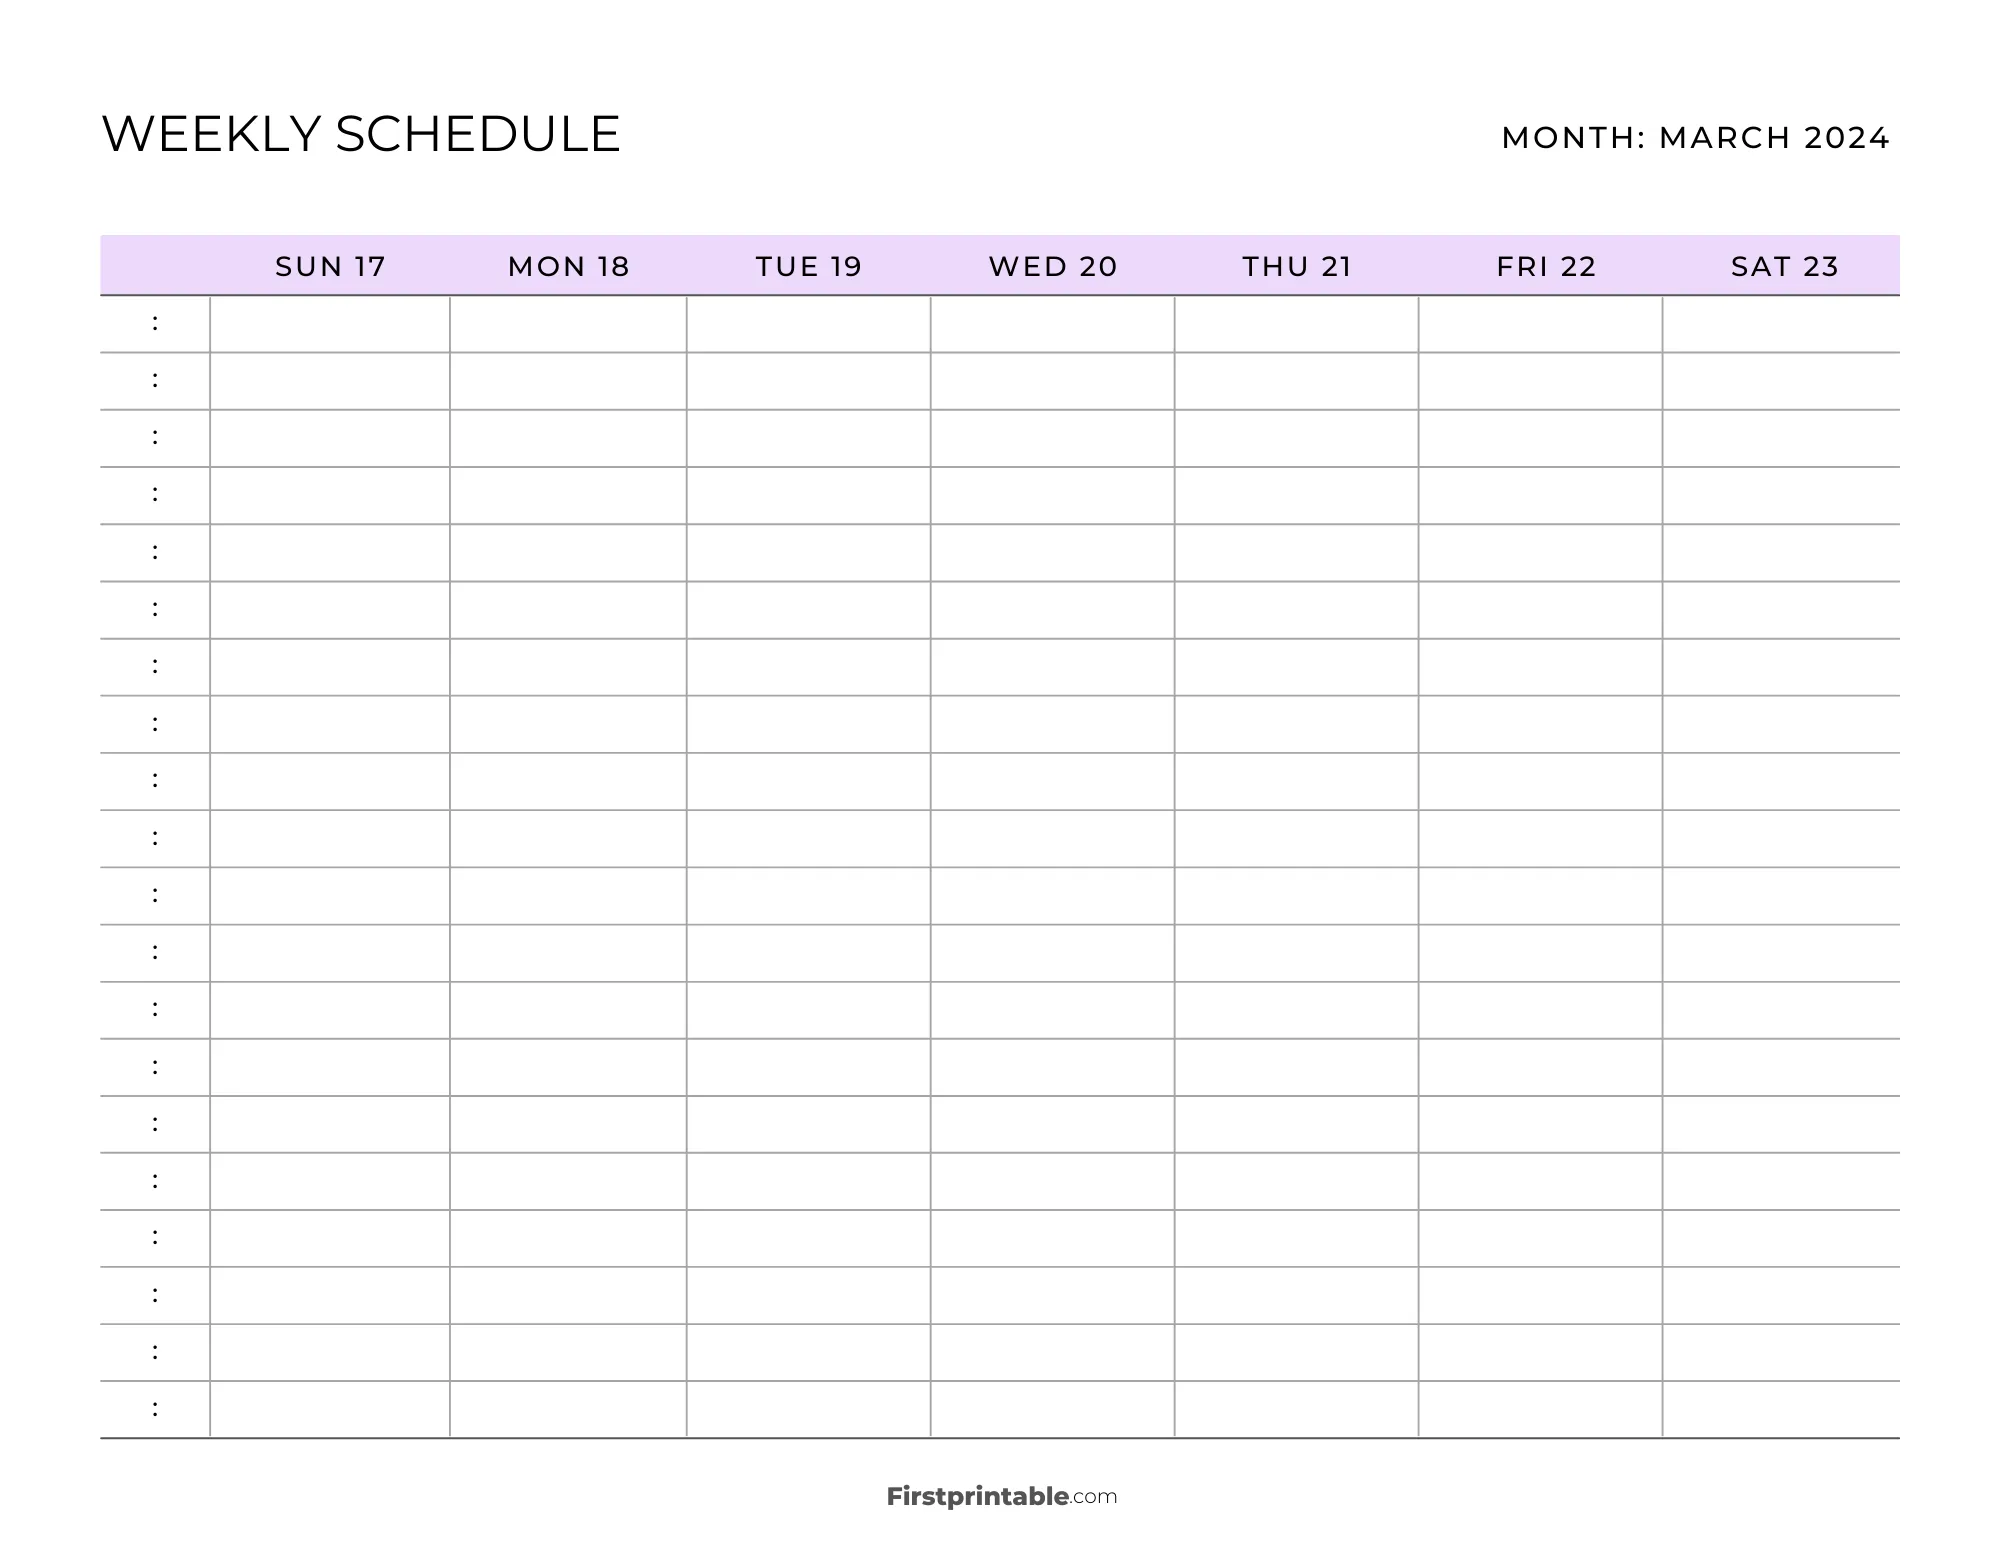 March 2024 Printable Weekly Schedule Template 02 - Purple